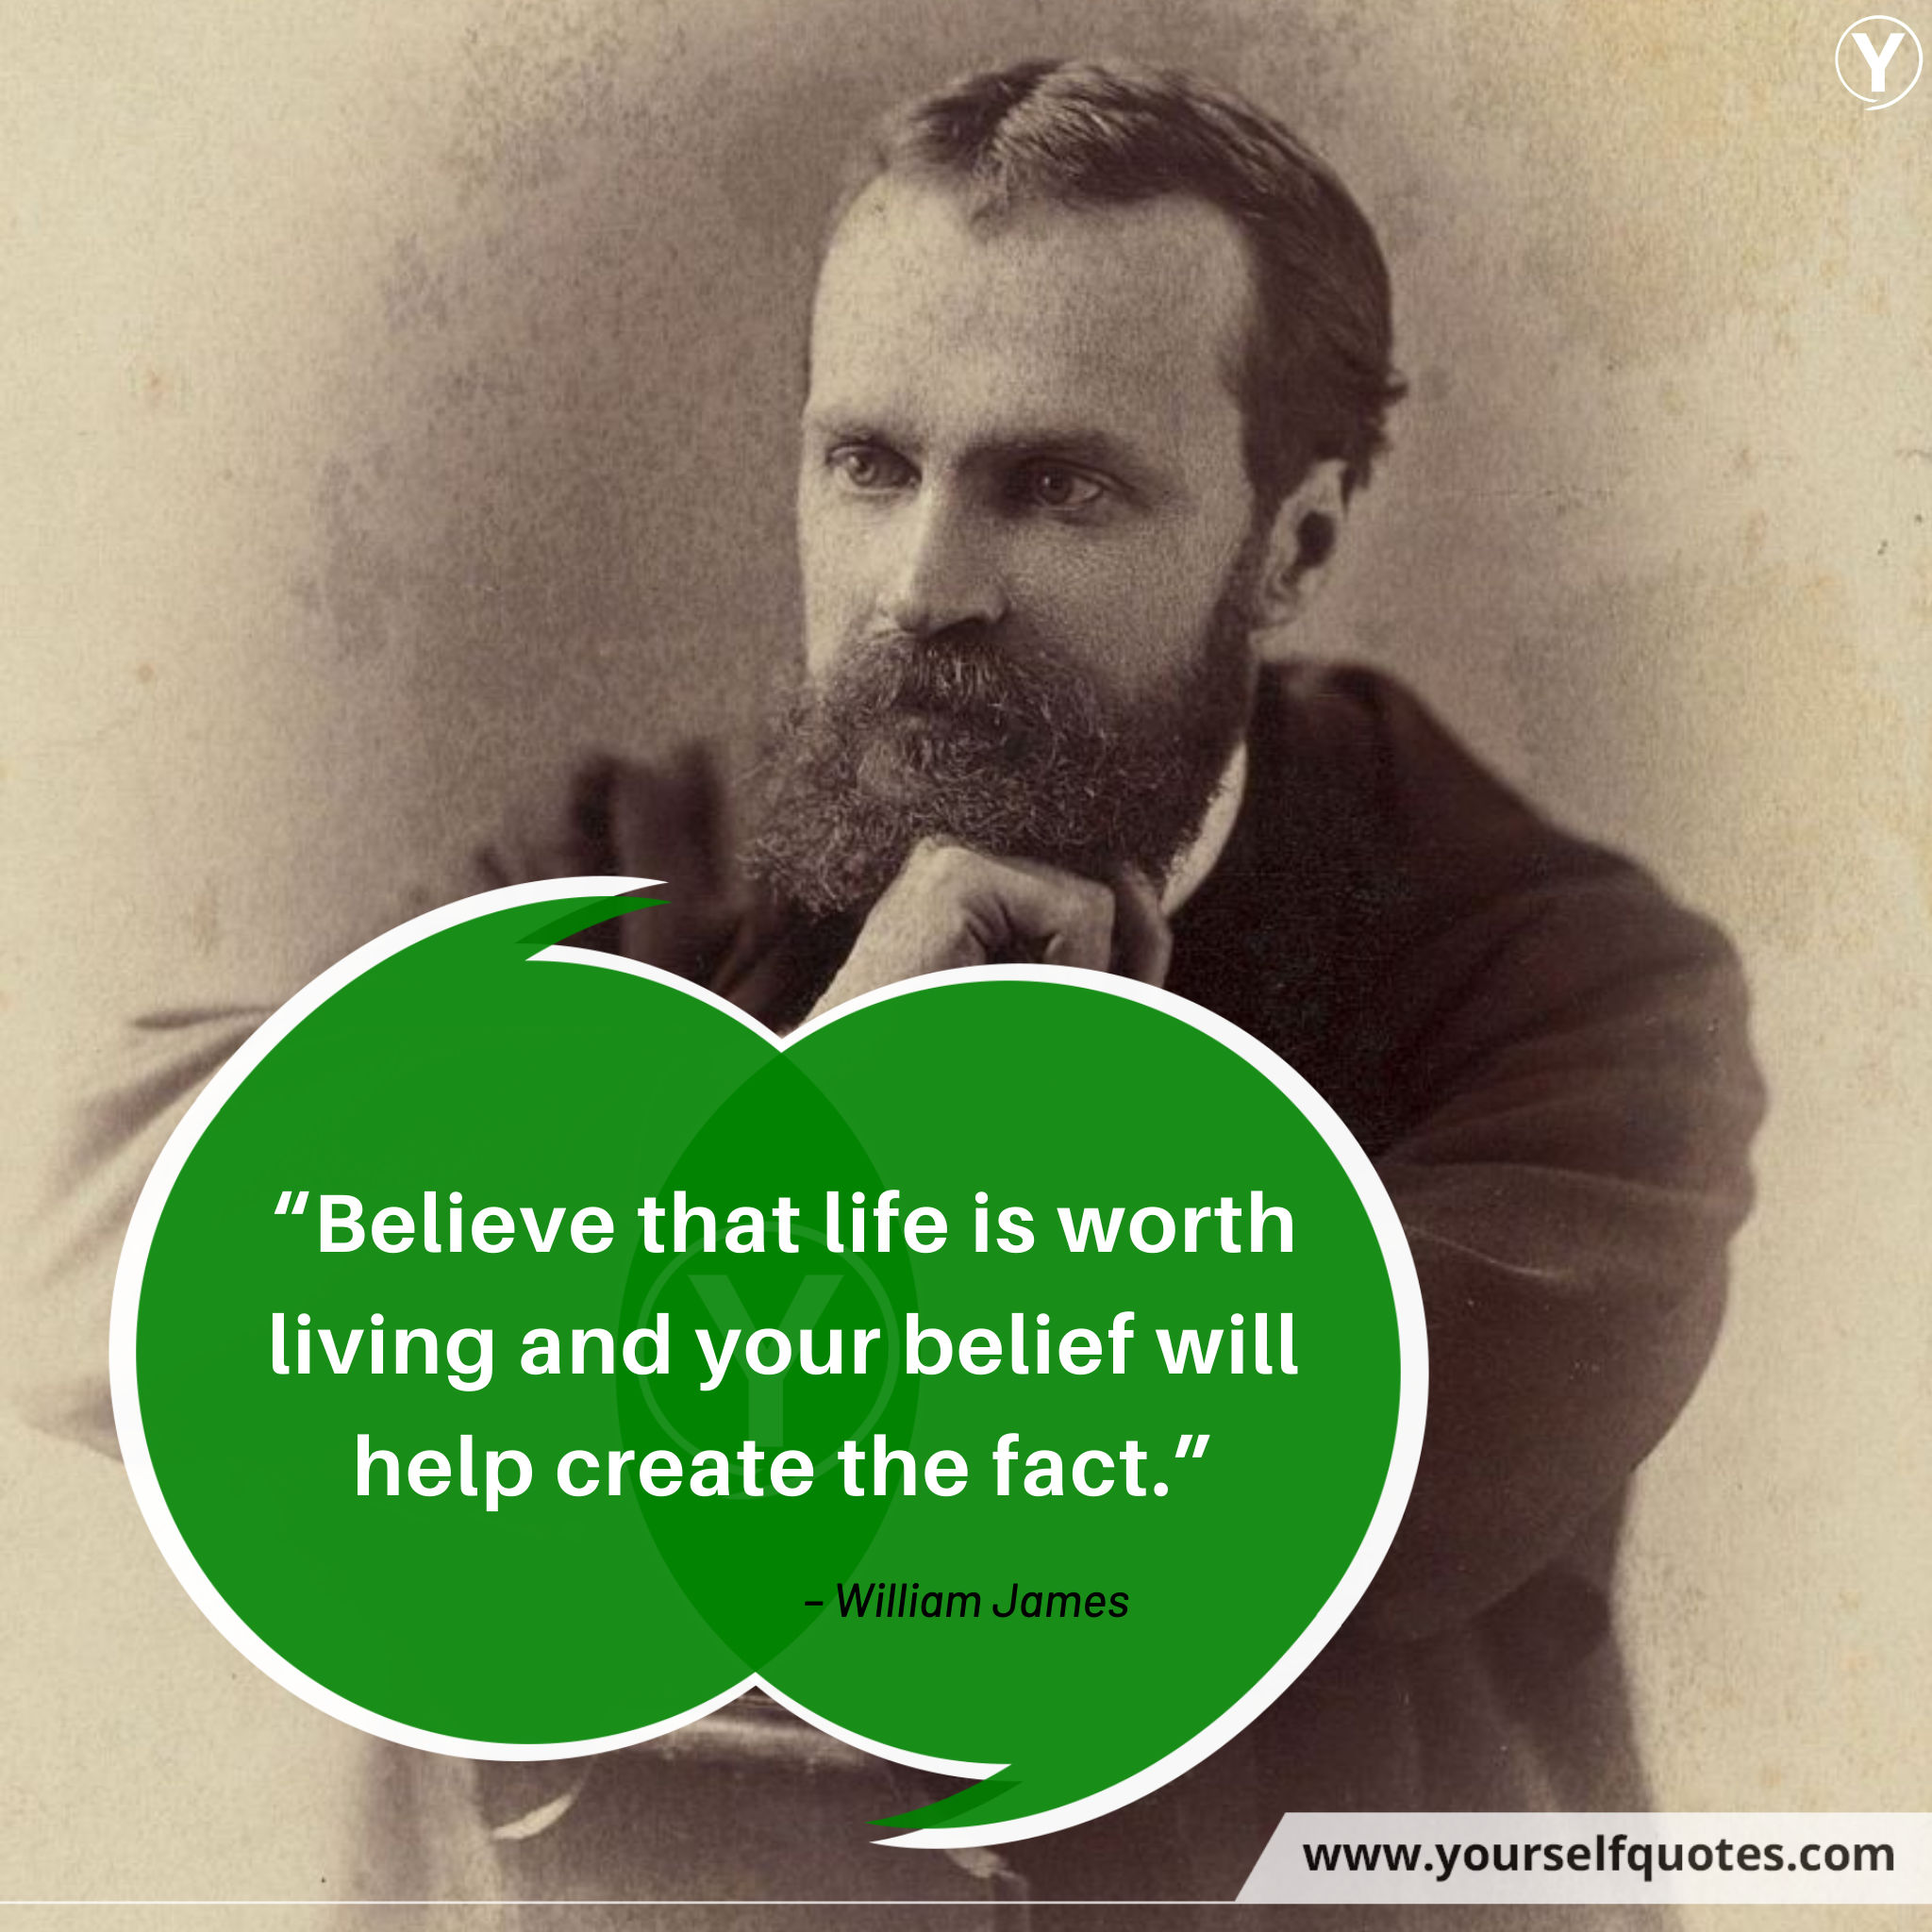 Quotes-on-Life-by-William-James